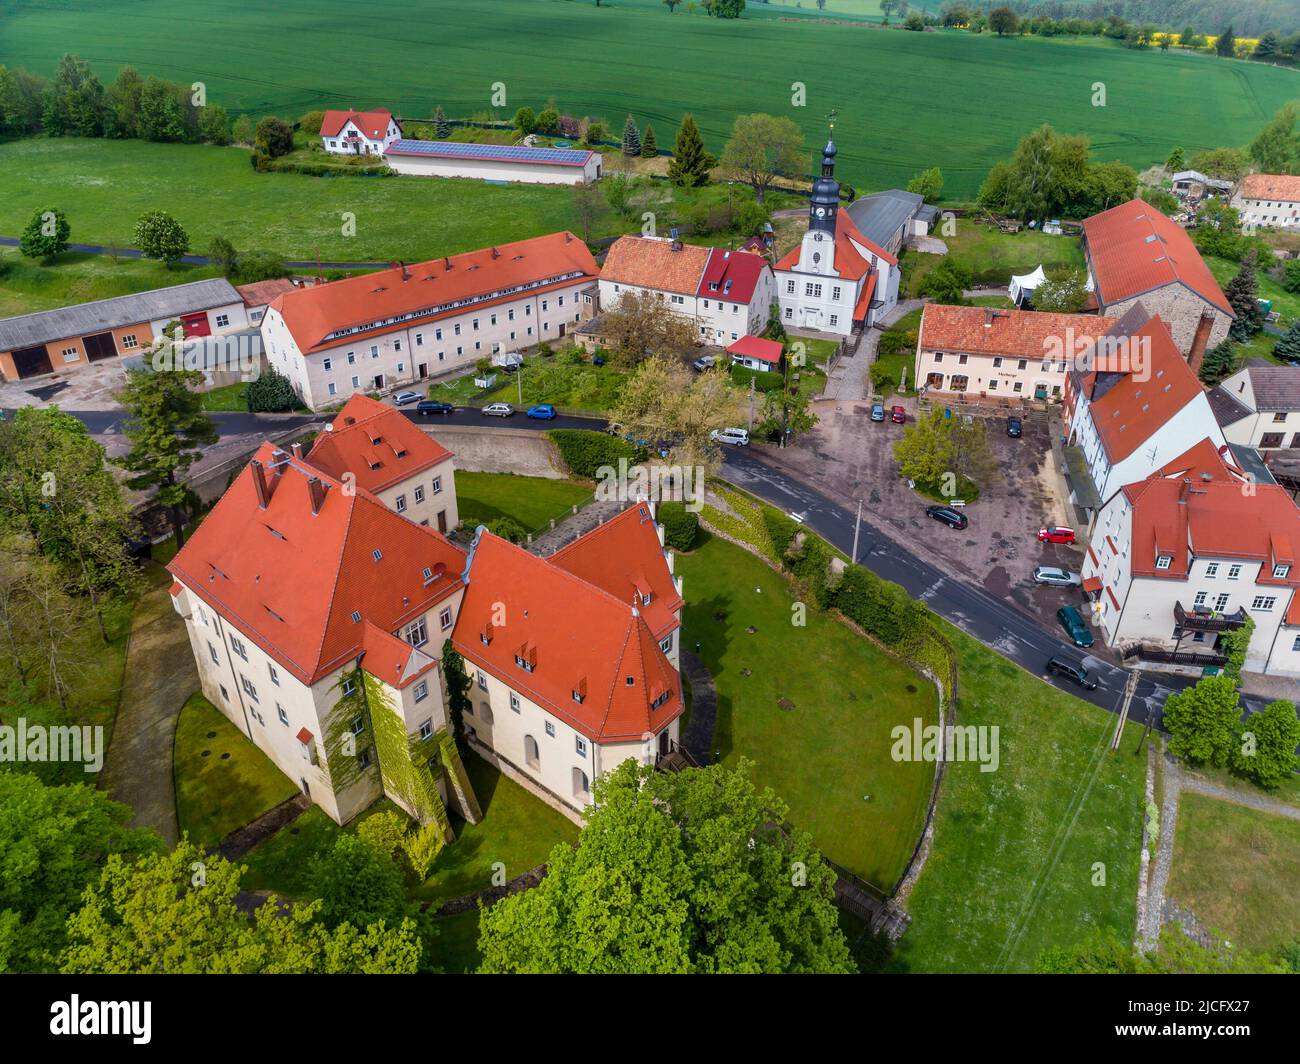 Schleinitz Castle: Schleinitz Castle is one of the most beautiful and impressive seats of the former landed gentry in Lommatzscher Pflege Stock Photo